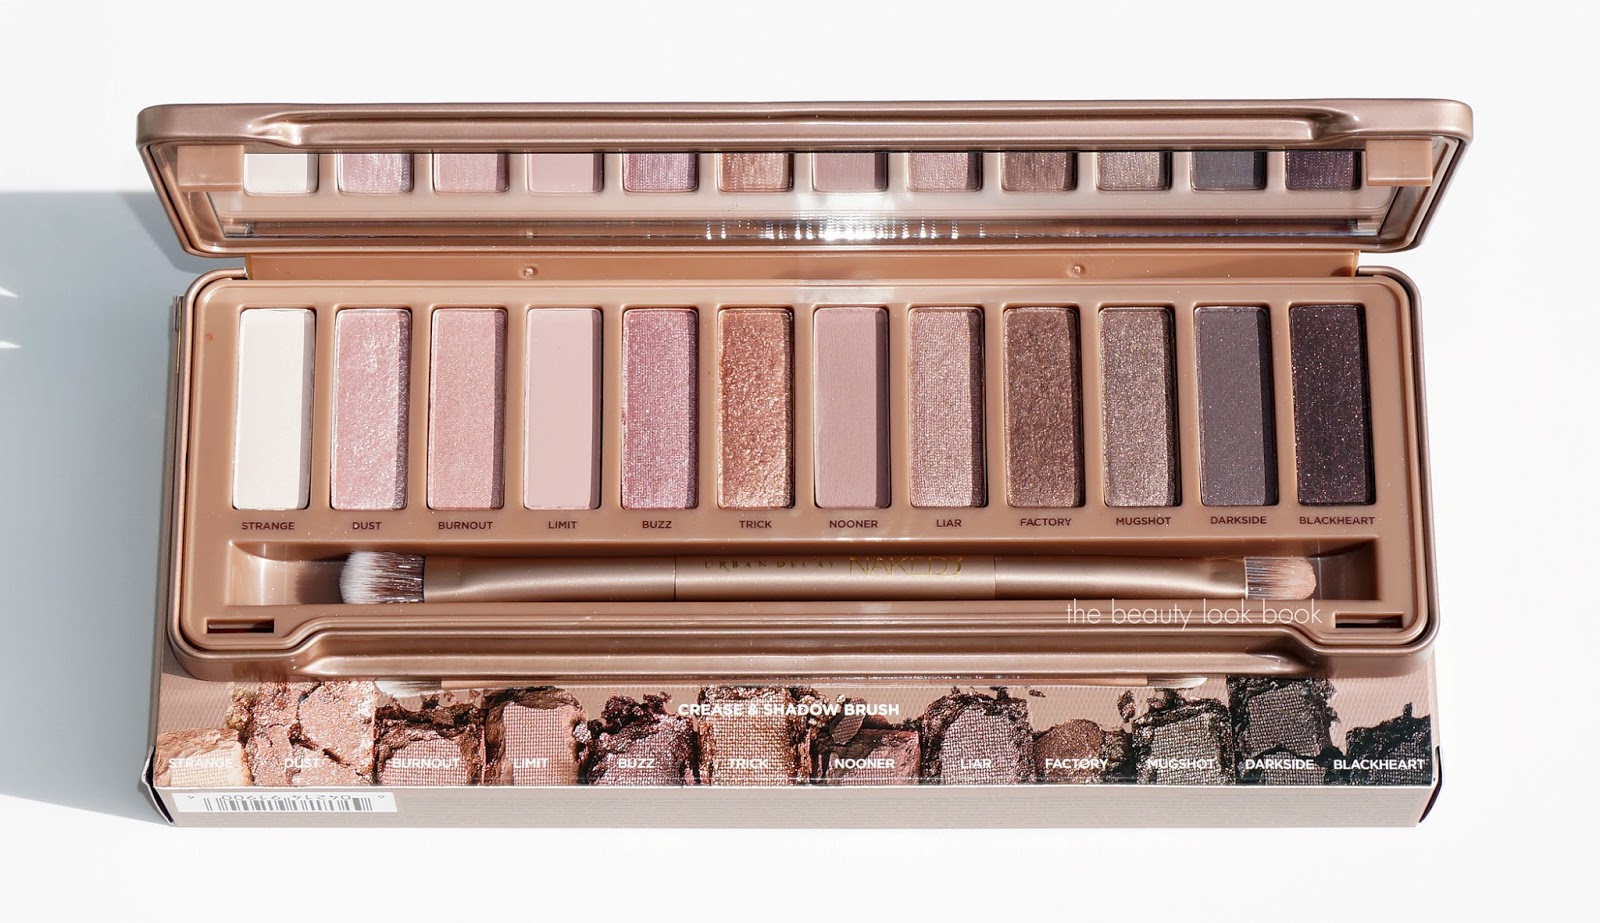 Urban Decay Naked3 Palette - The Beauty Look Book